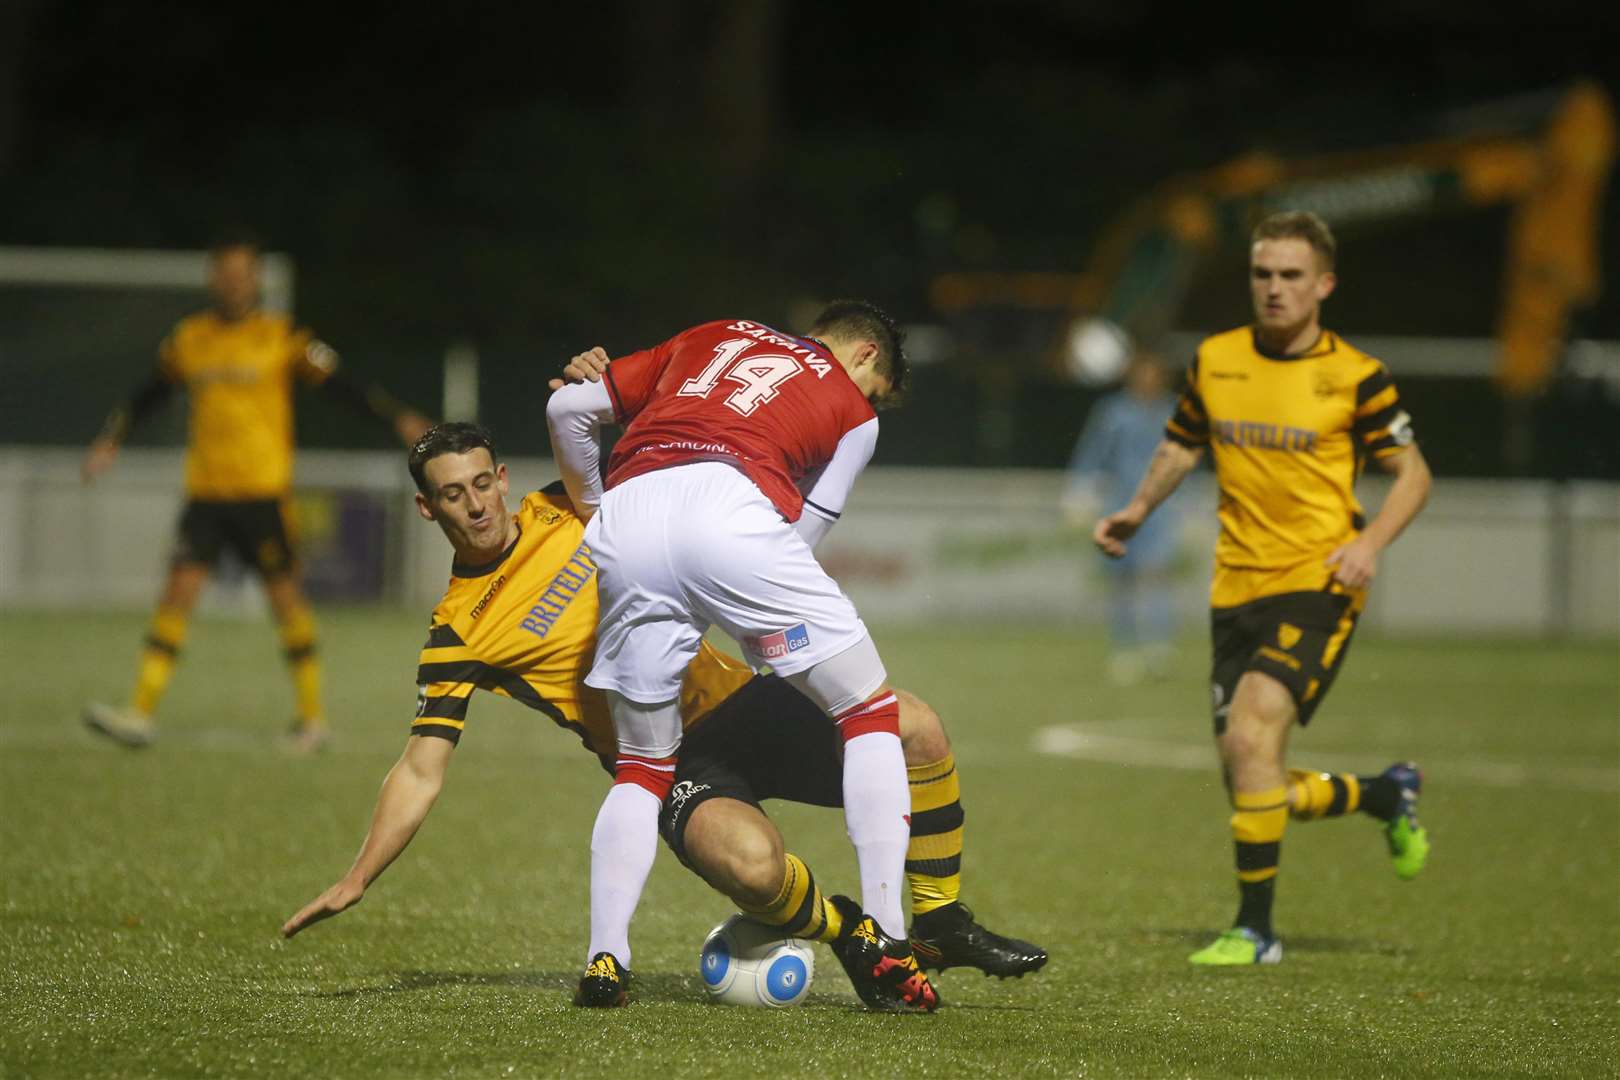 Callum Driver made an impression on Jamie Coyle during their days at Maidstone Picture: Andy Jones